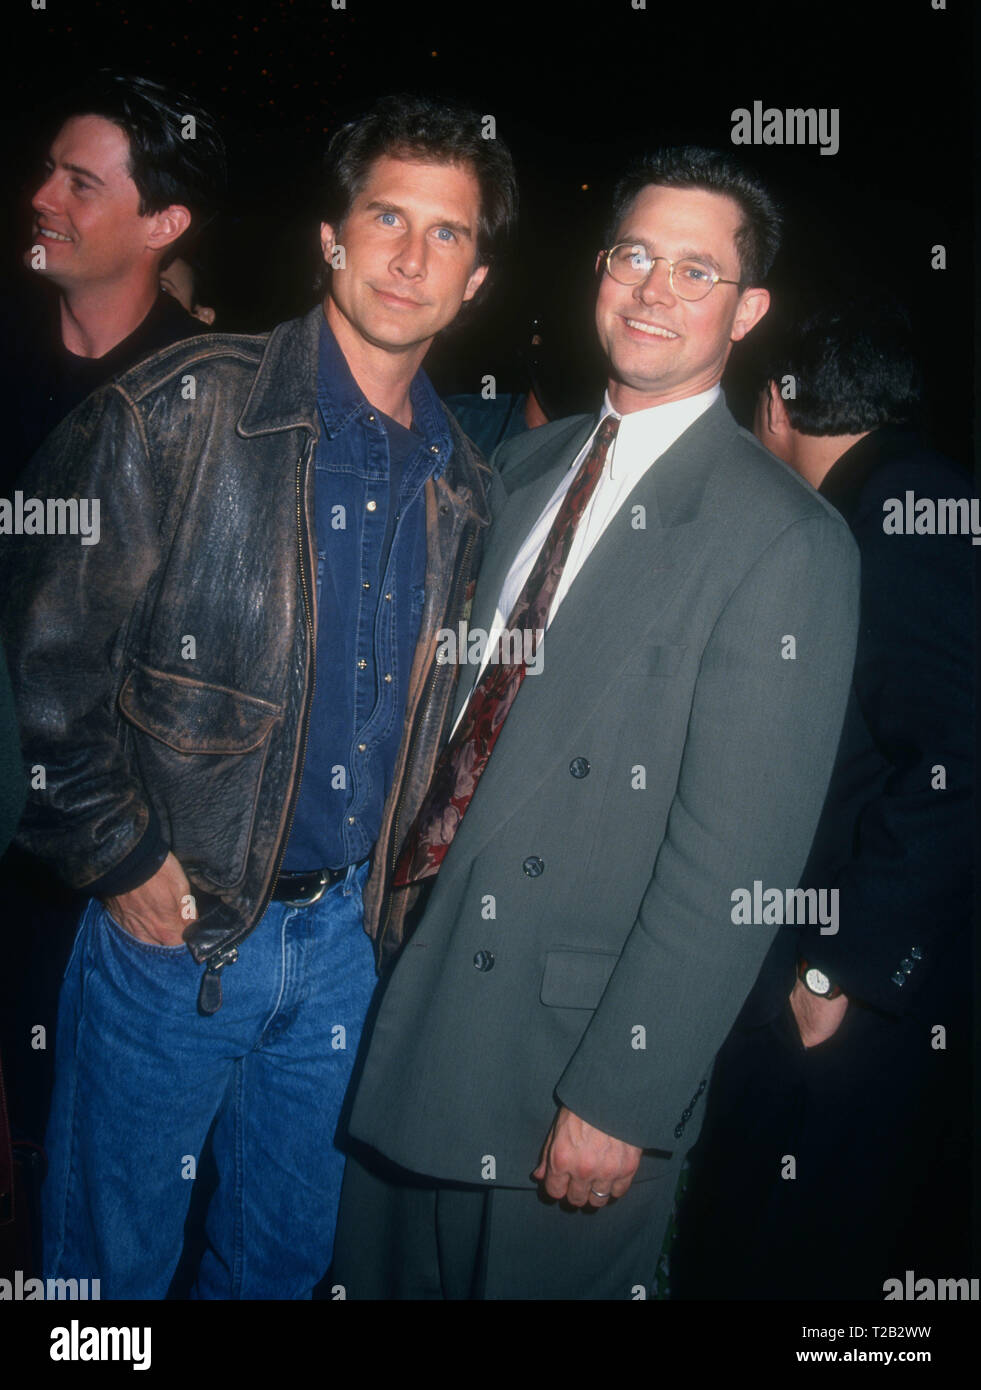 LOS ANGELES, CA - MARCH 9: Actor Kyle MacLachlan, actor Parker Stevenson and his brother Hutch Parker attend HBO's 'Against The Wall' Premiere on March 9, 1994 at DGA Theatre in Los Angeles, California. Photo by Barry King/Alamy Stock Photo Stock Photo